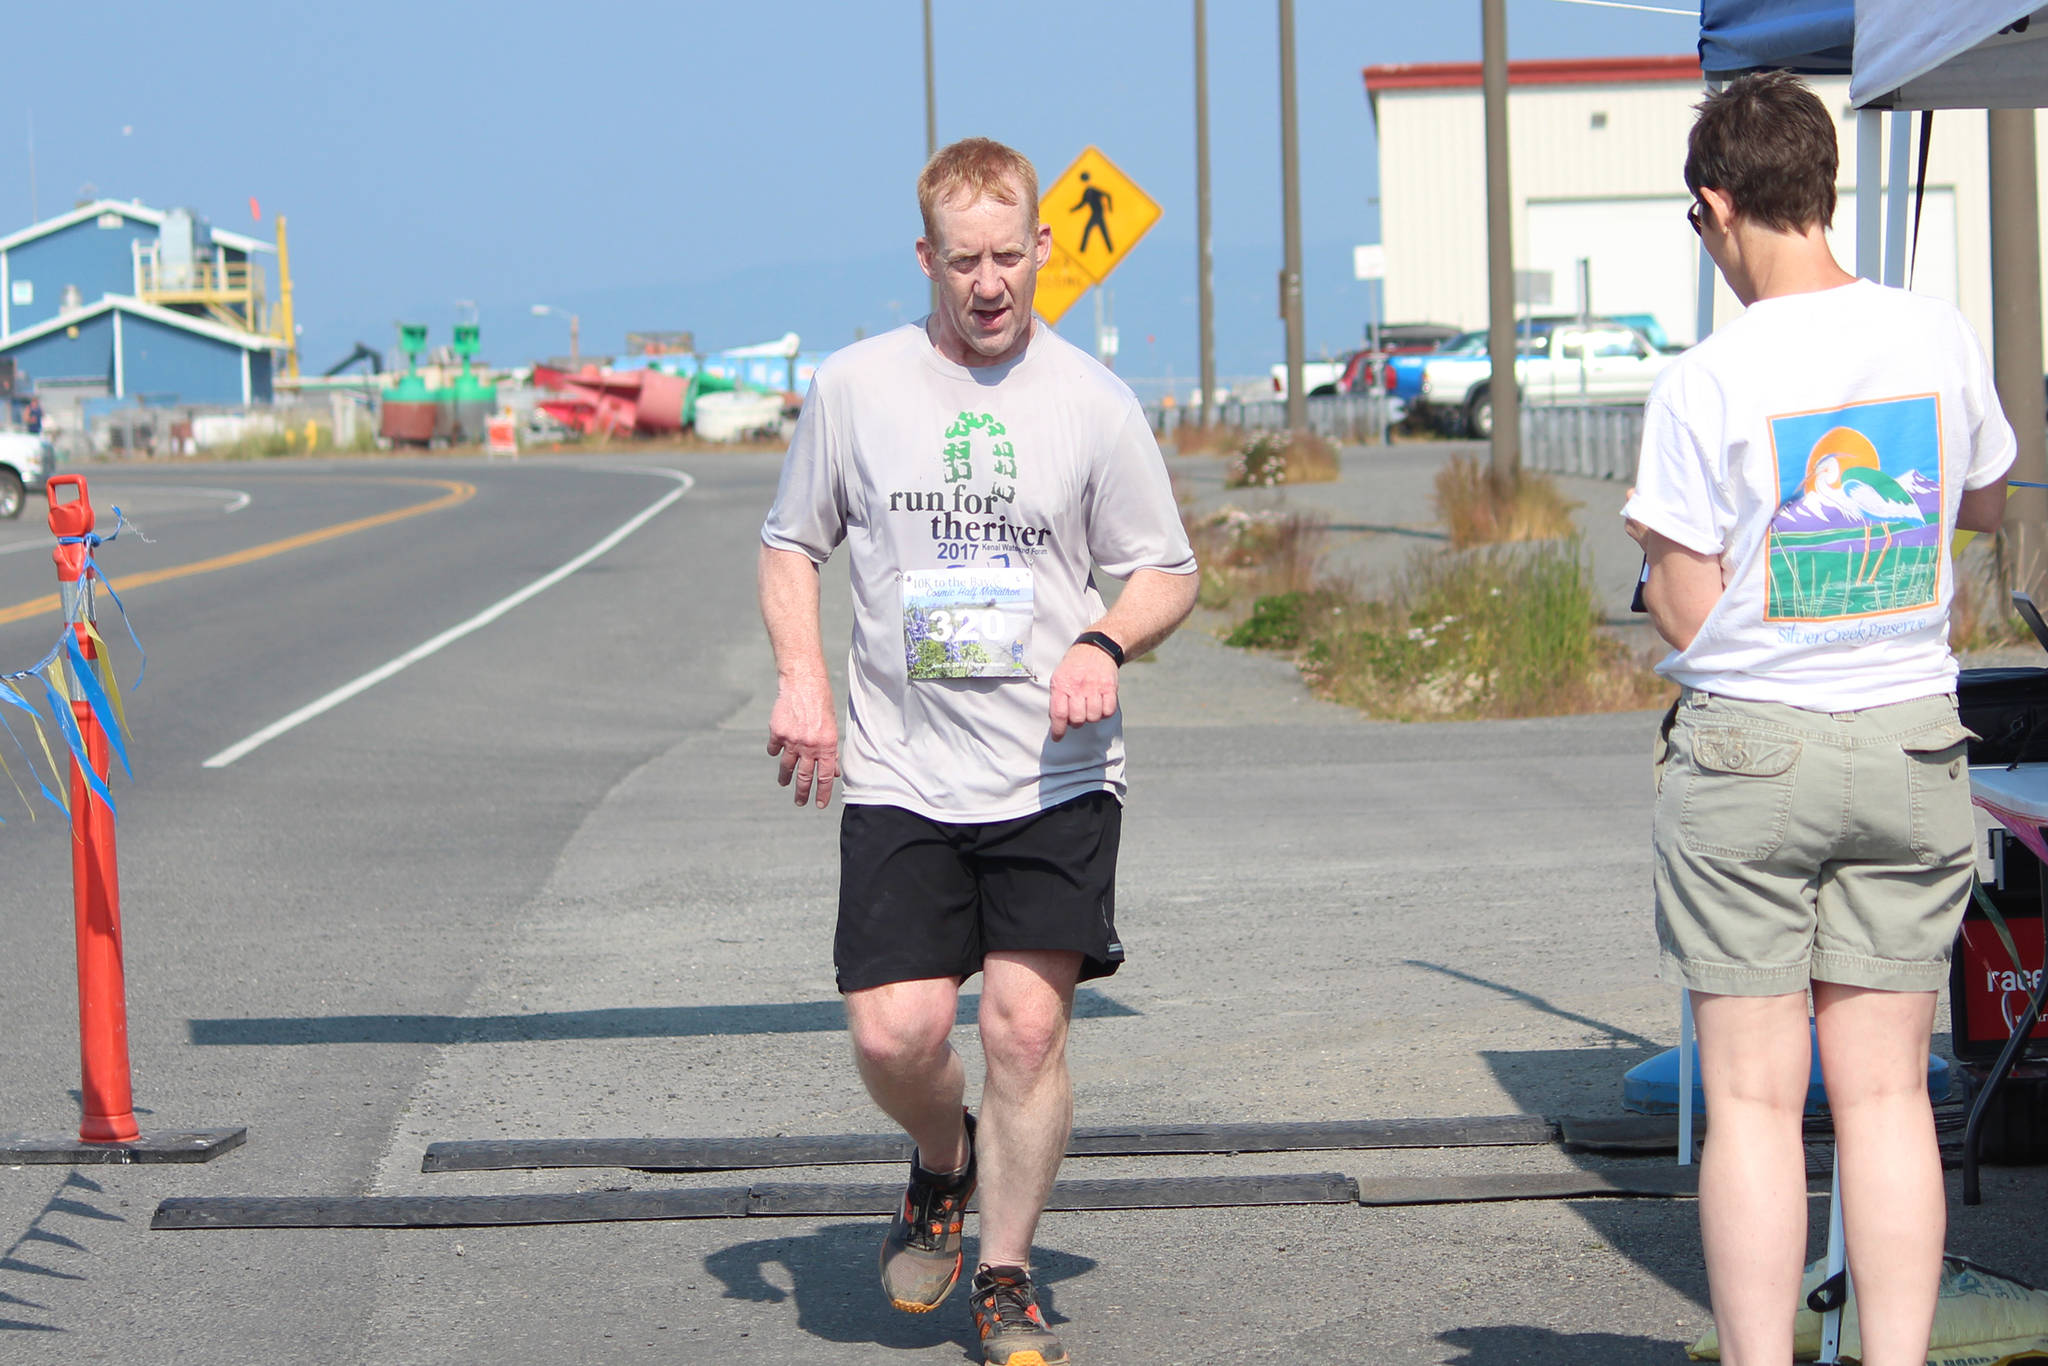 Soldotna’s Kent Peterson crosses the finish line of the Spit Run 10K to the Bay on Saturday, June 29, 2019 in Homer, Alaska. (Photo by Megan Pacer/Homer News)